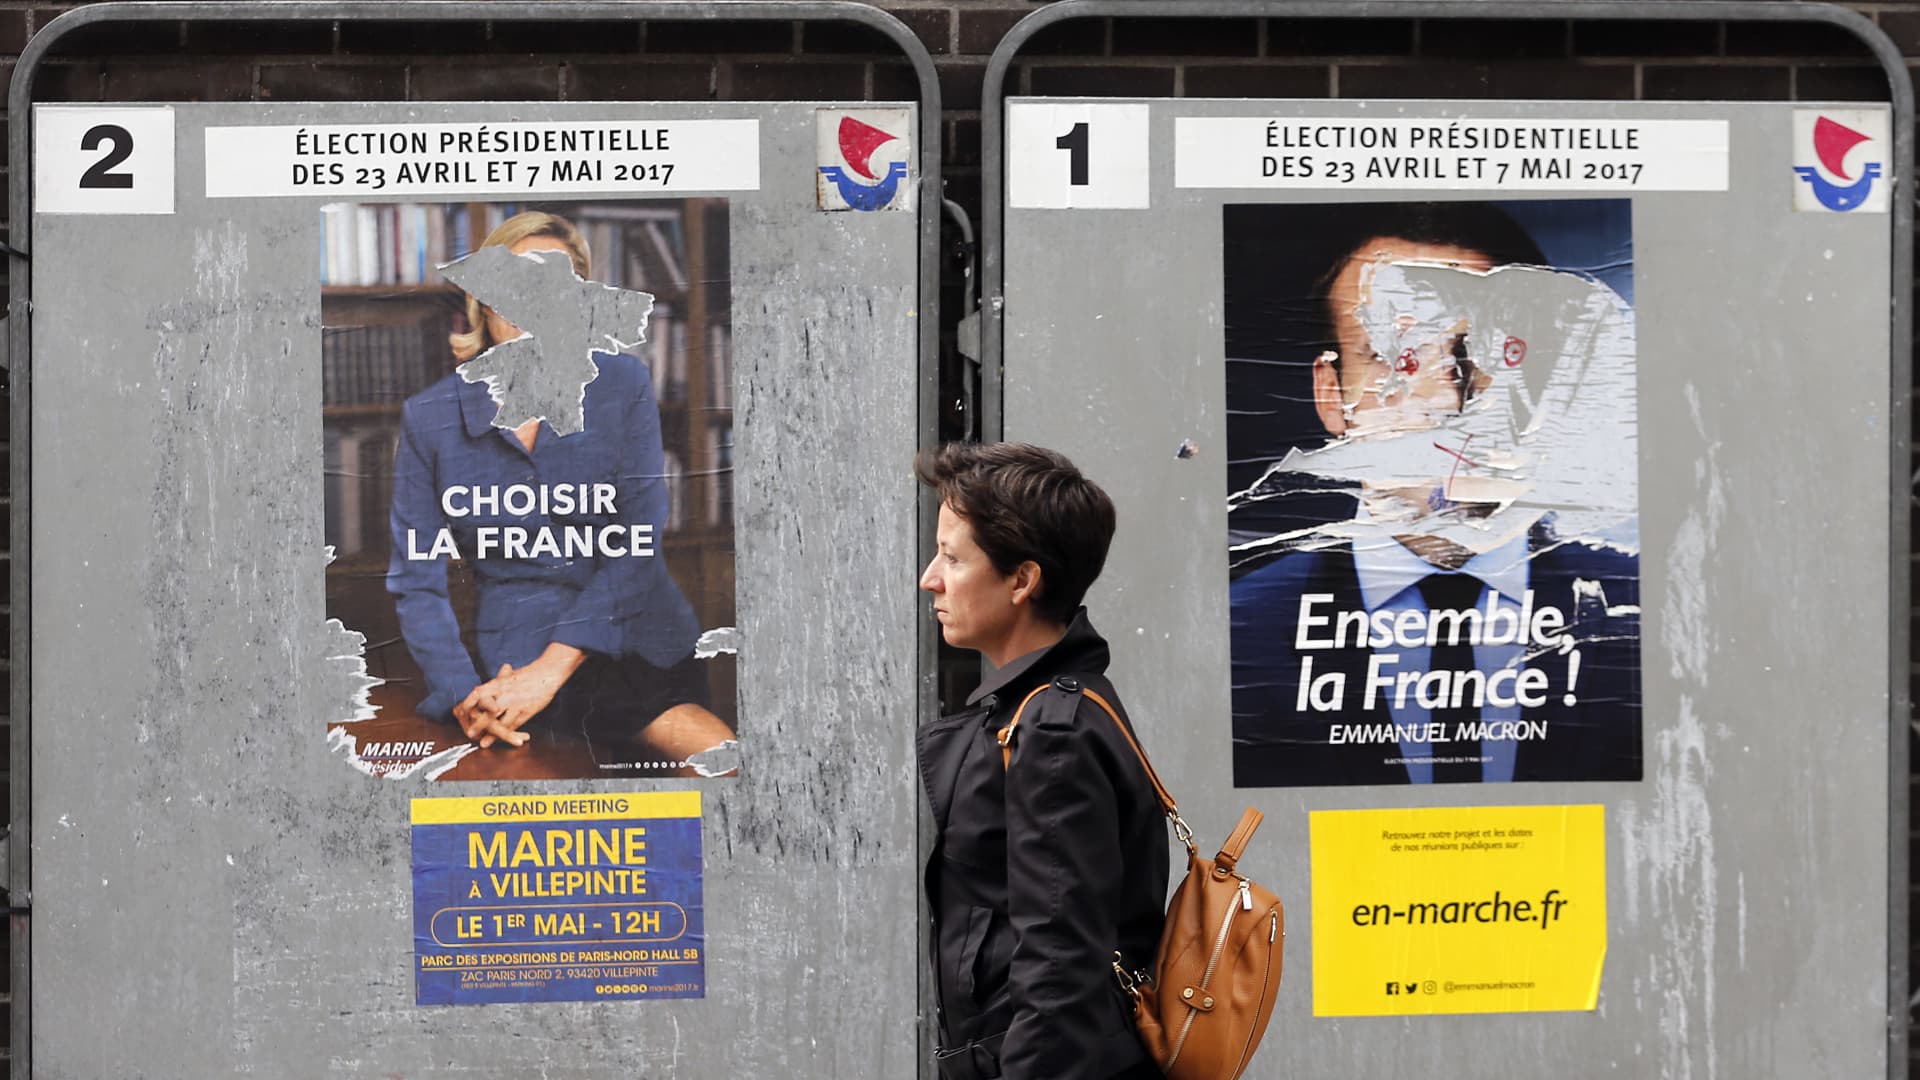 France’s liberal base is aging fast. Macron now needs to win over angry younger voters